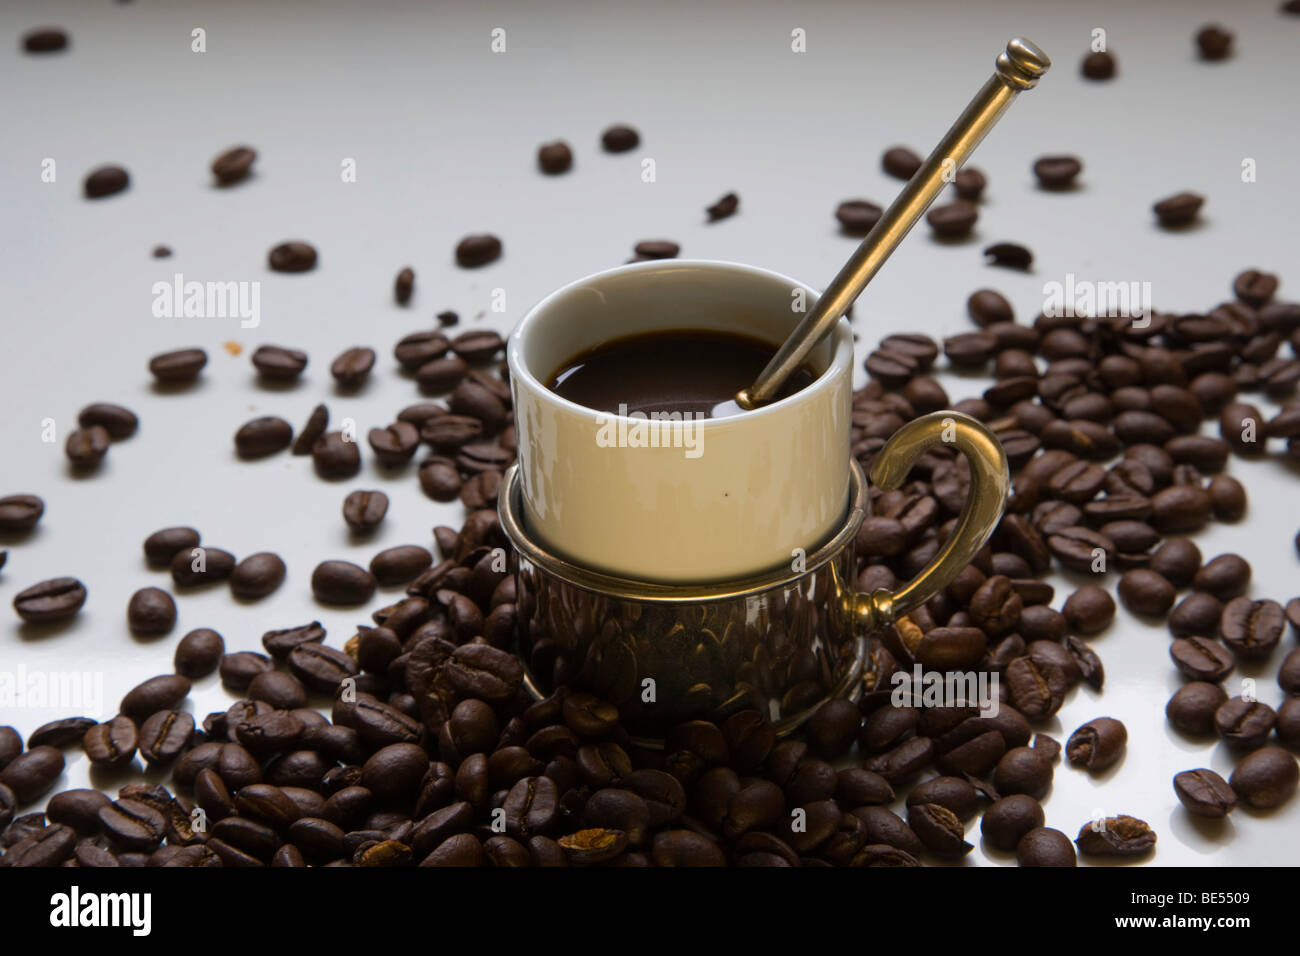 Cup of coffee and coffee beans Stock Photo